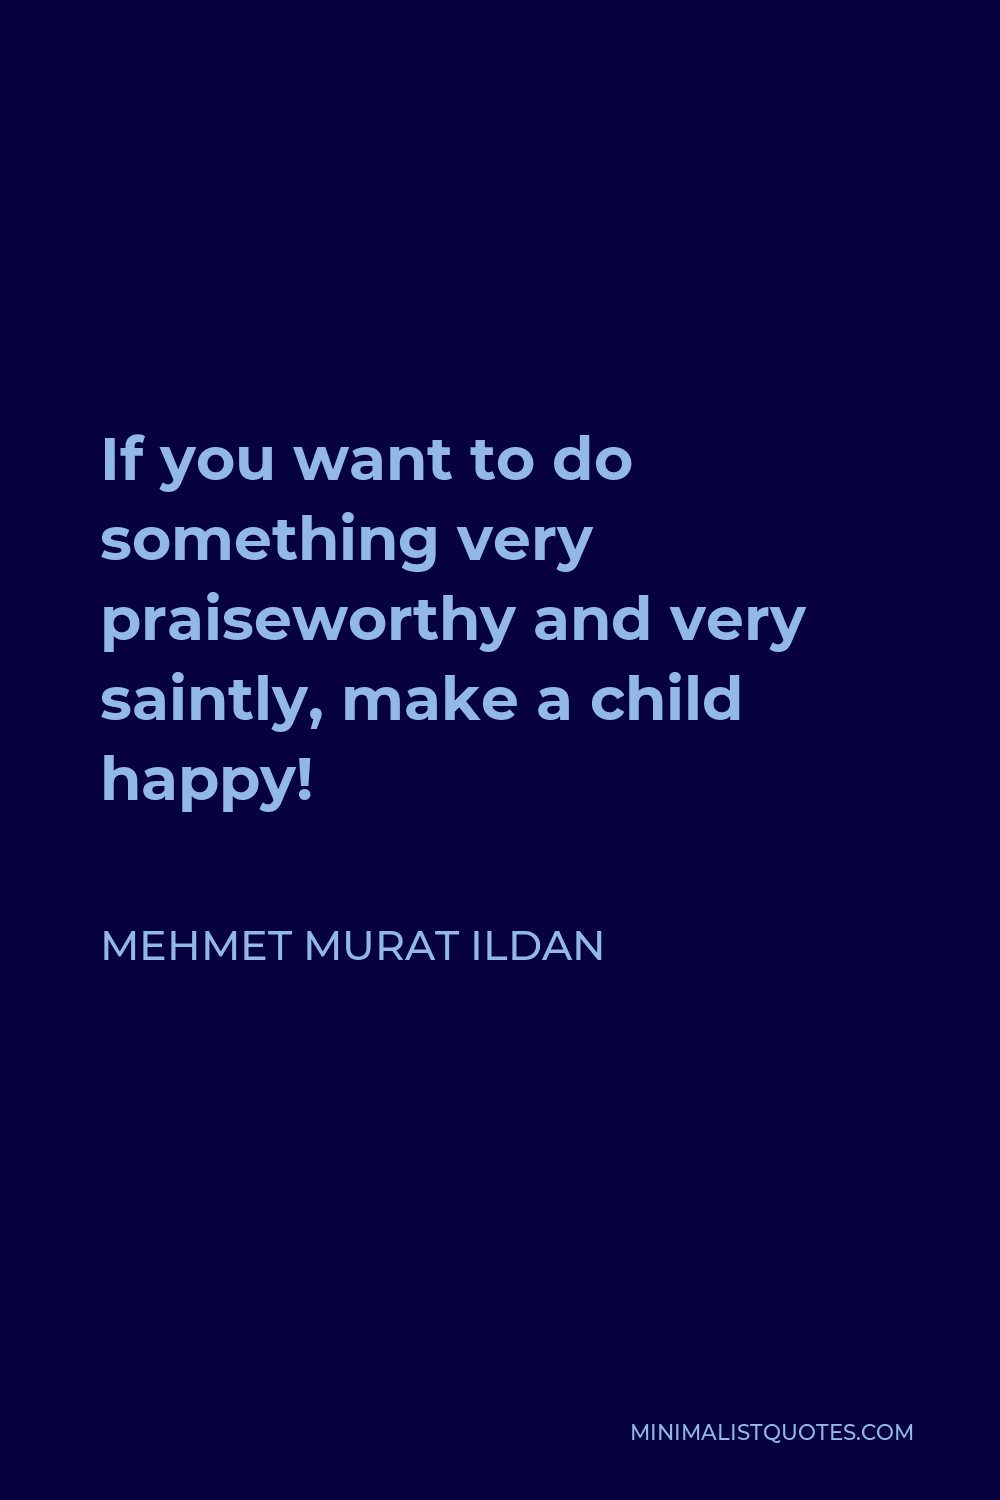 Mehmet Murat Ildan Quote - If you want to do something very praiseworthy and very saintly, make a child happy!